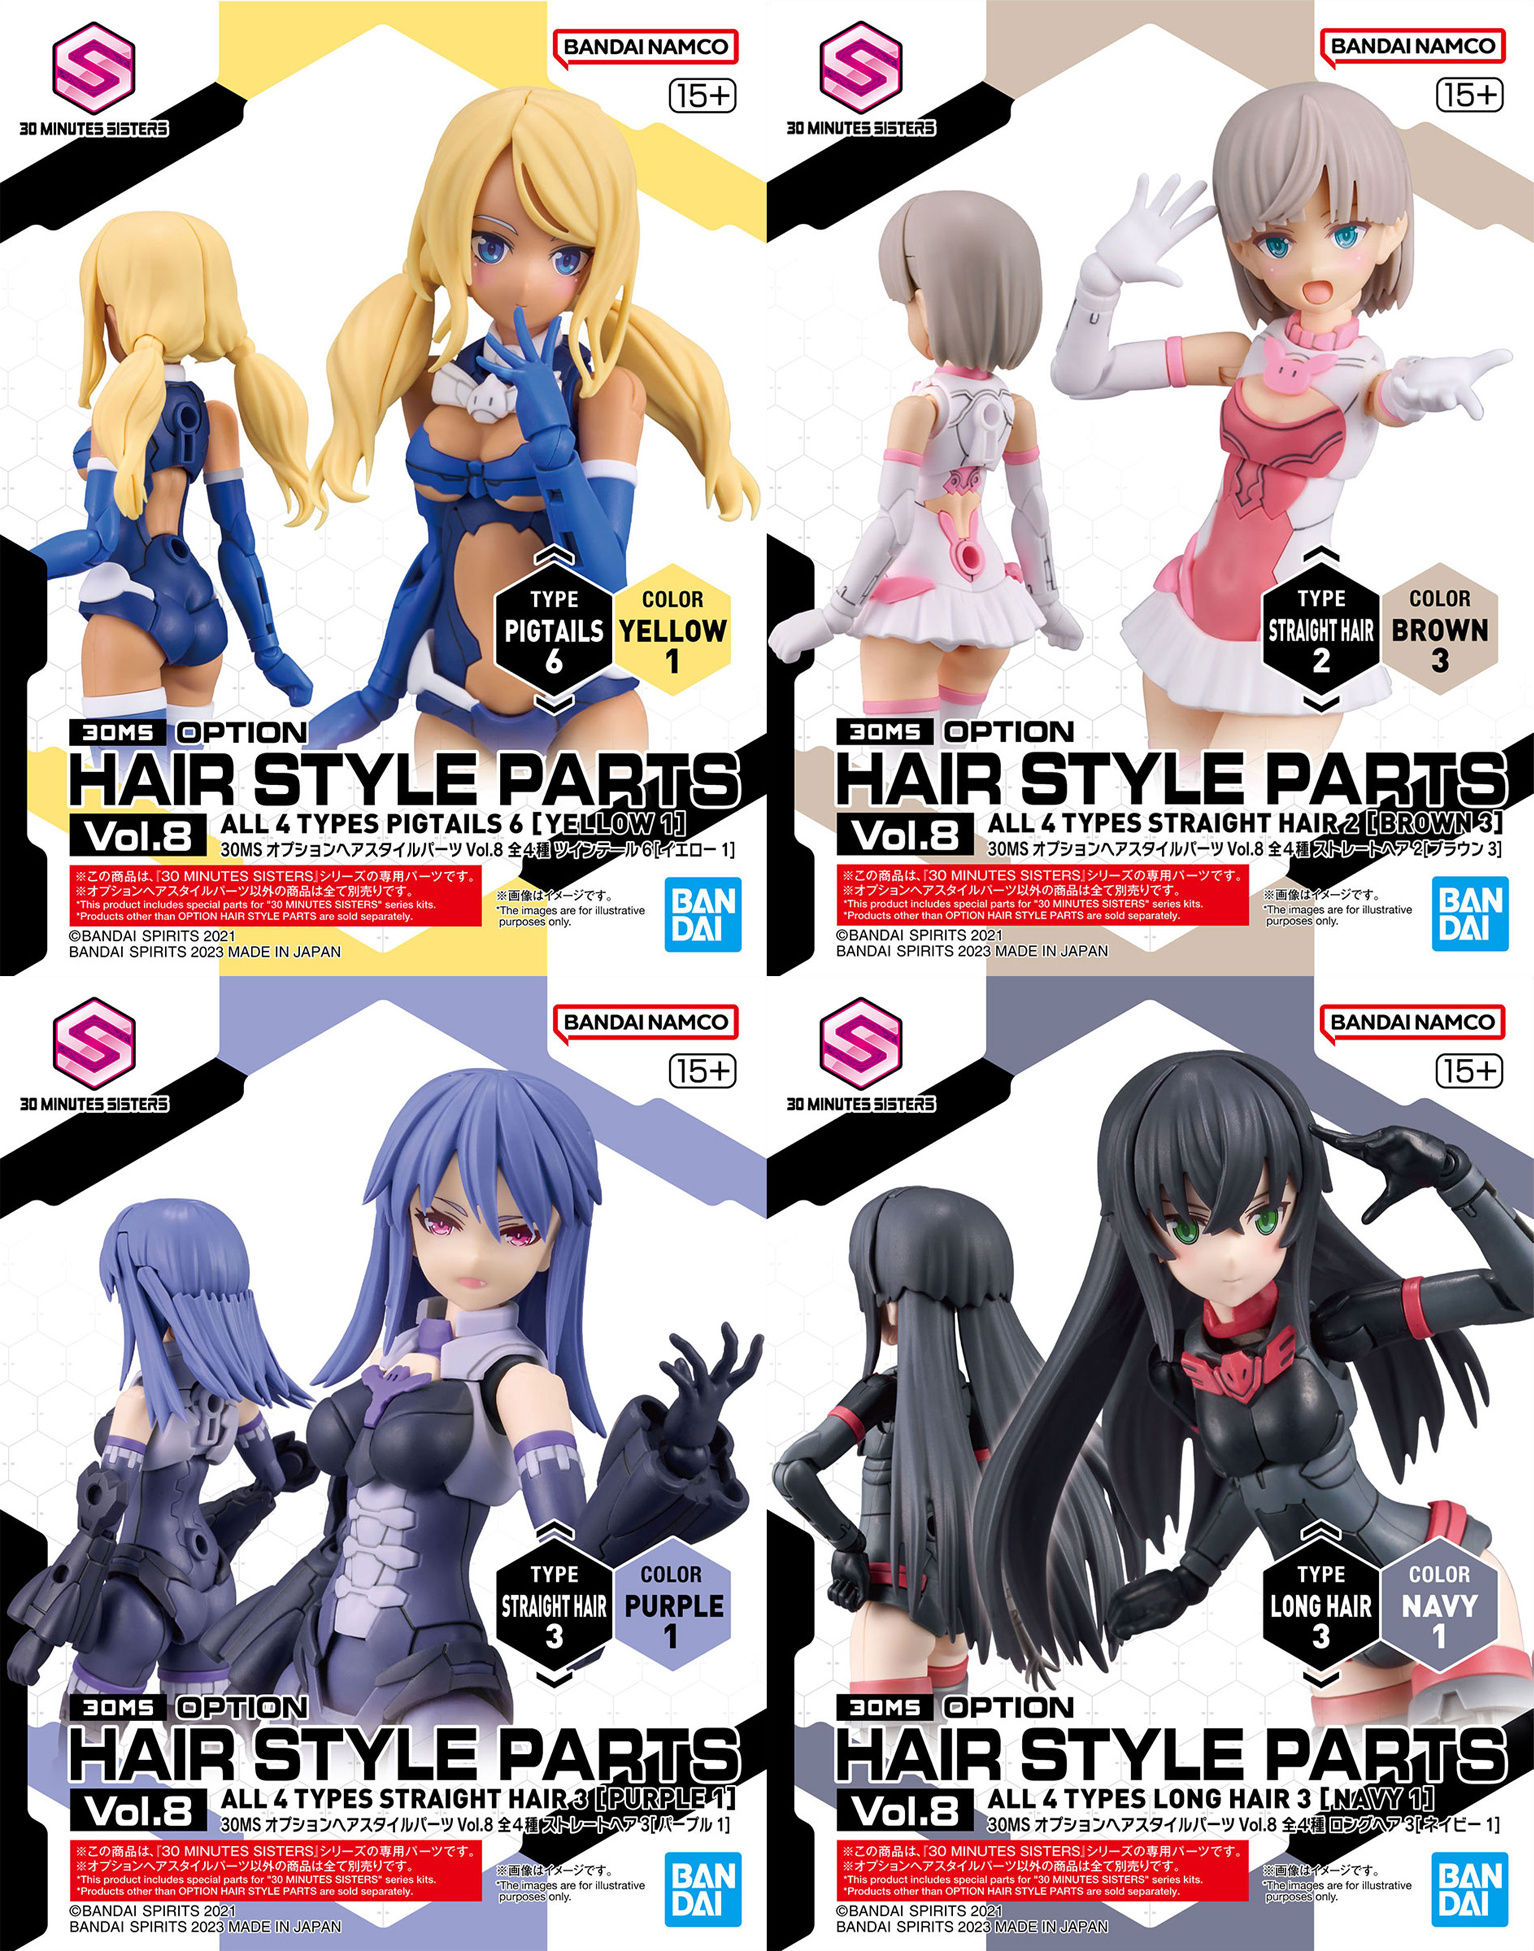 30MS Optional Hairstyle Parts Vol. 8 (Set of 4) 